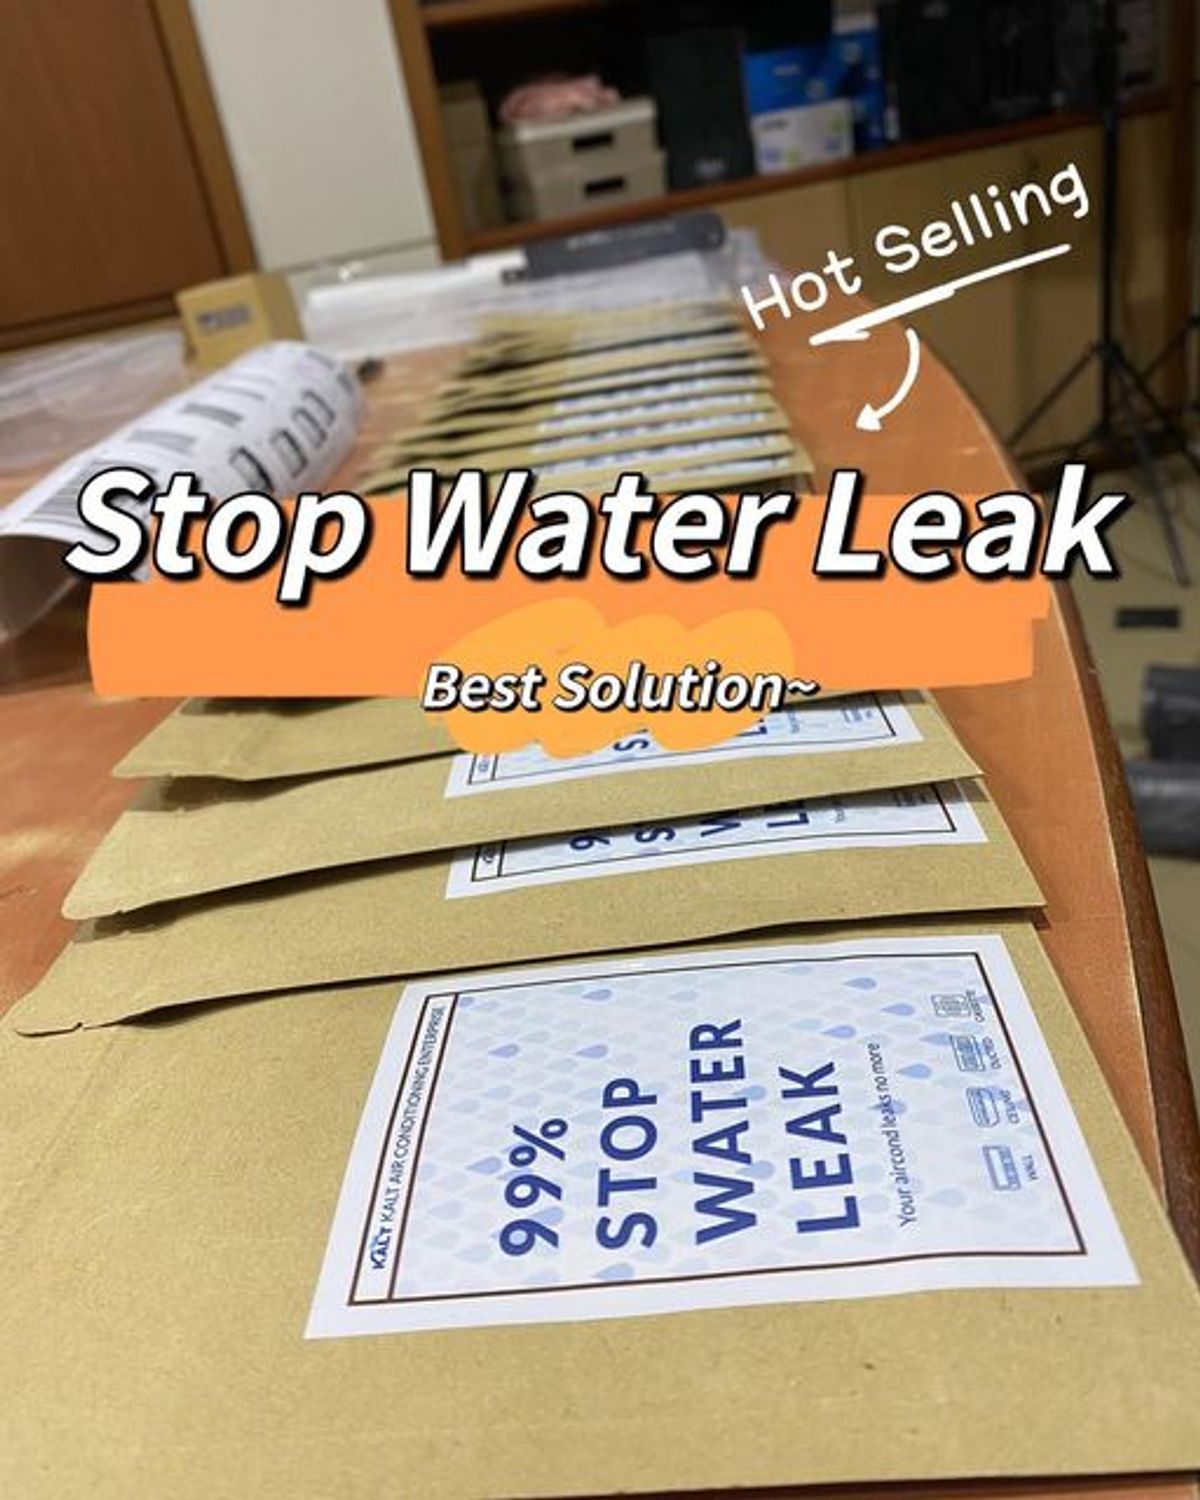 Are you ready for the smartest way for your water leak issue